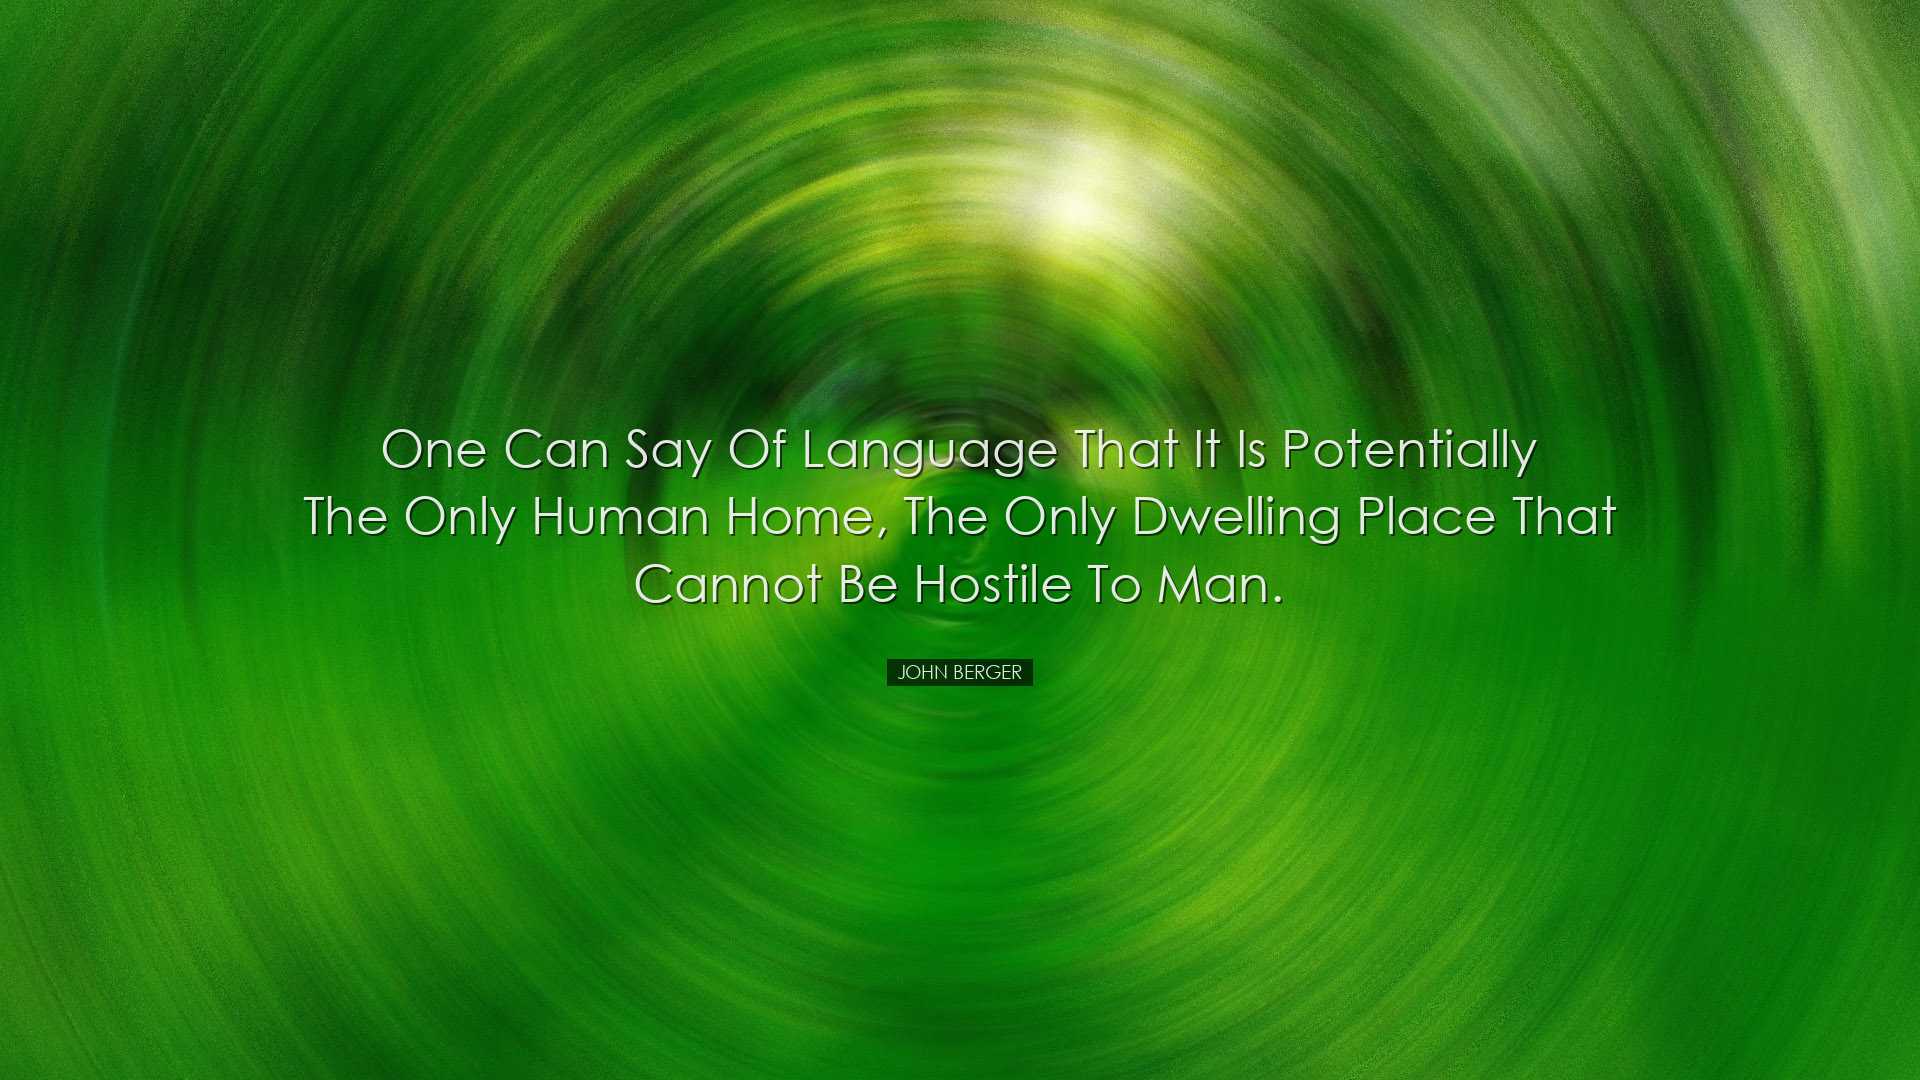 One can say of language that it is potentially the only human home